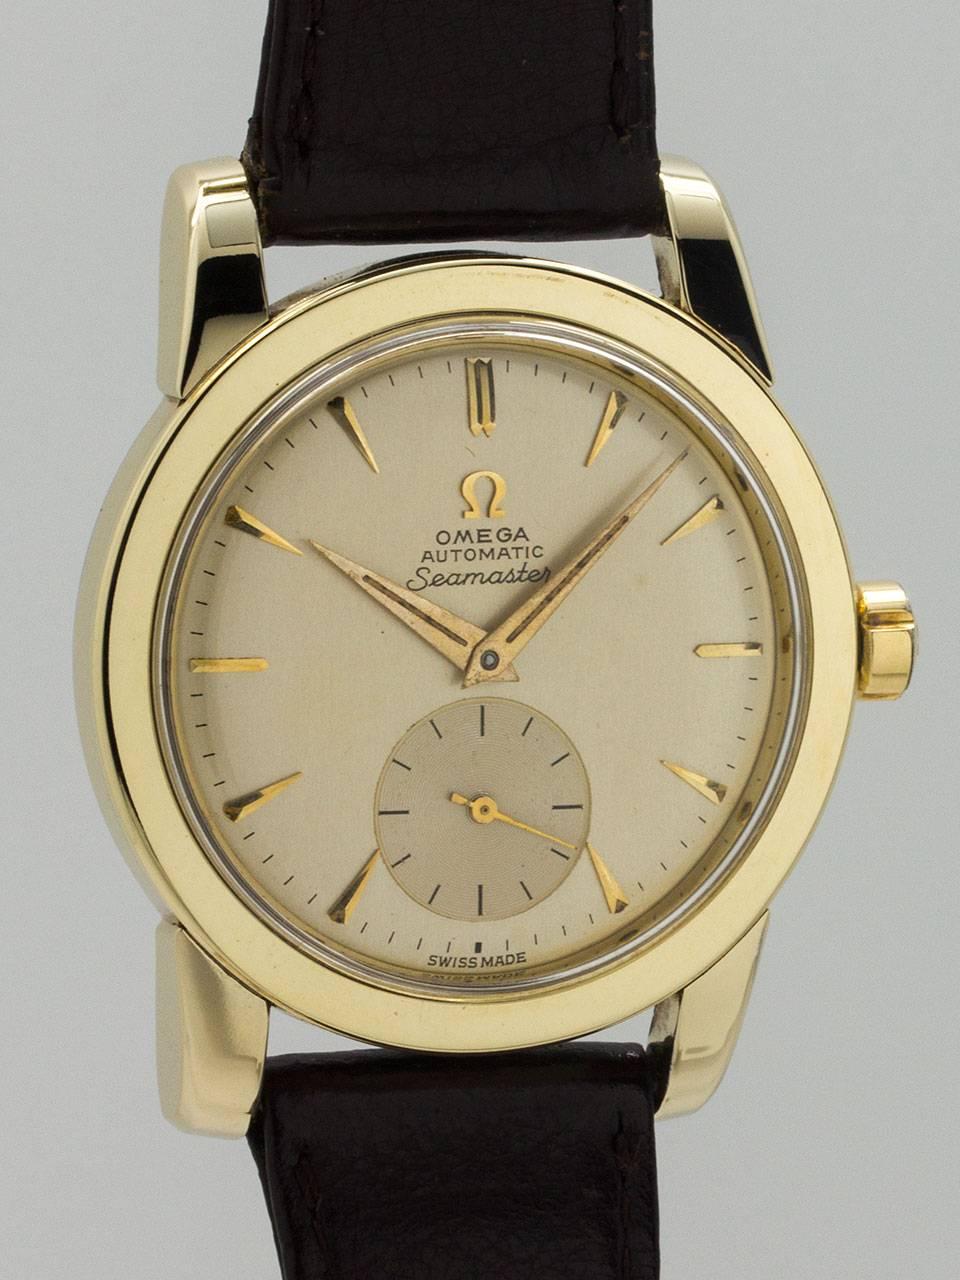 Omega Seamaster ref 2766-1 movement serial number 14.3 million circa 1954. Great looking large and robust 35 x 42 mm case with wide bezel and wide heavy lugs, signed Omega crown and snap back steel case back. Gold shell case in excellent condition